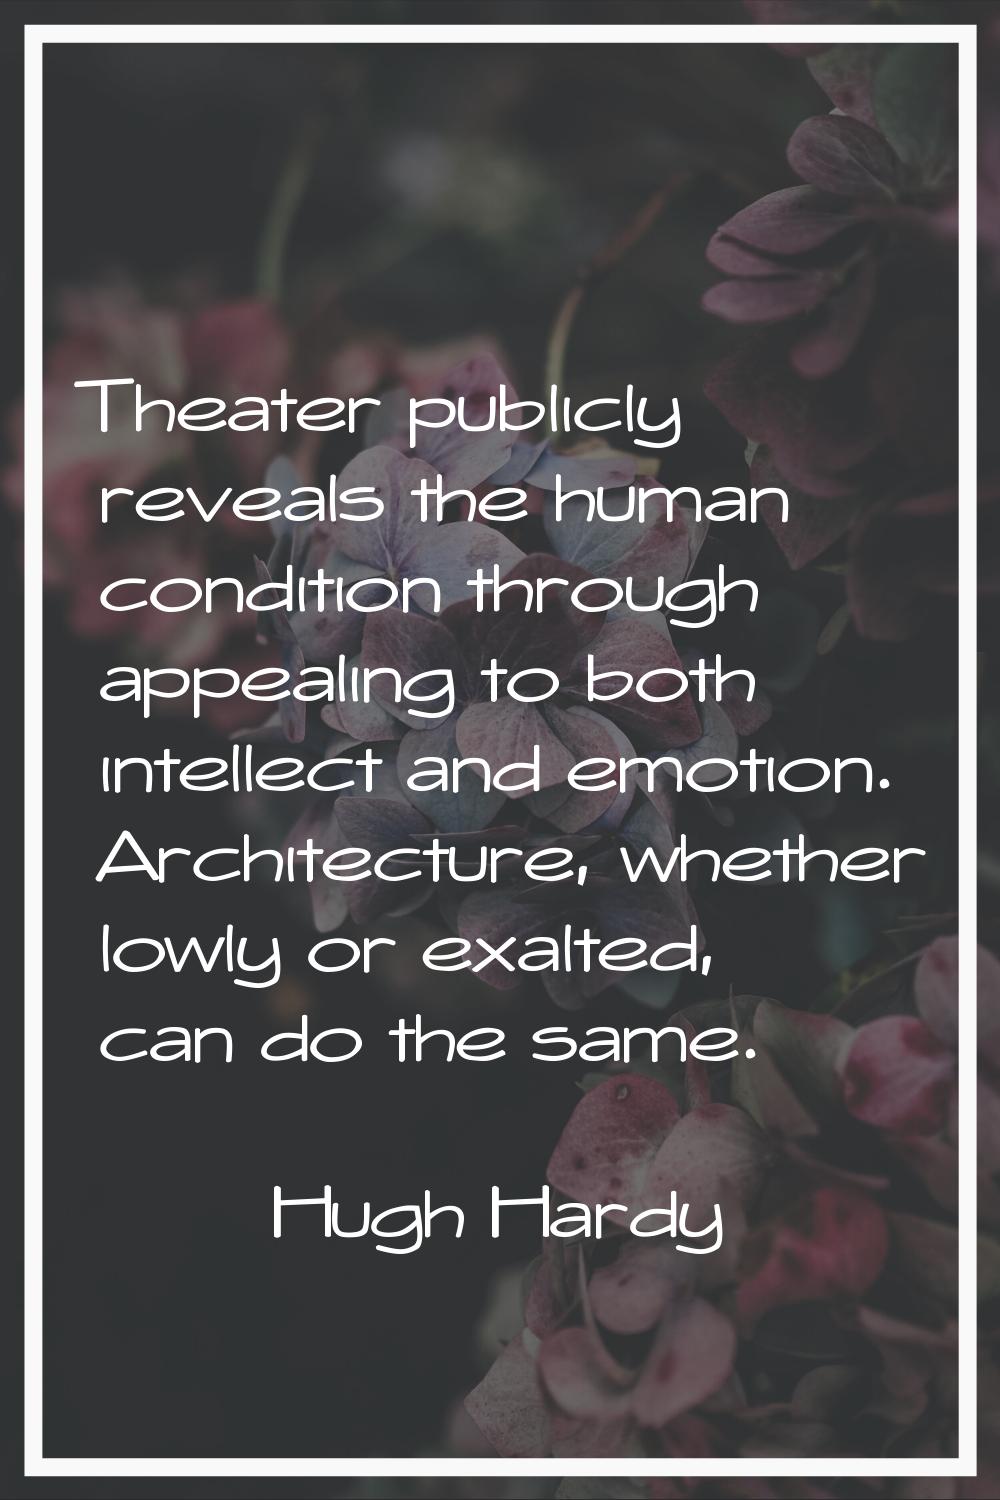 Theater publicly reveals the human condition through appealing to both intellect and emotion. Archi